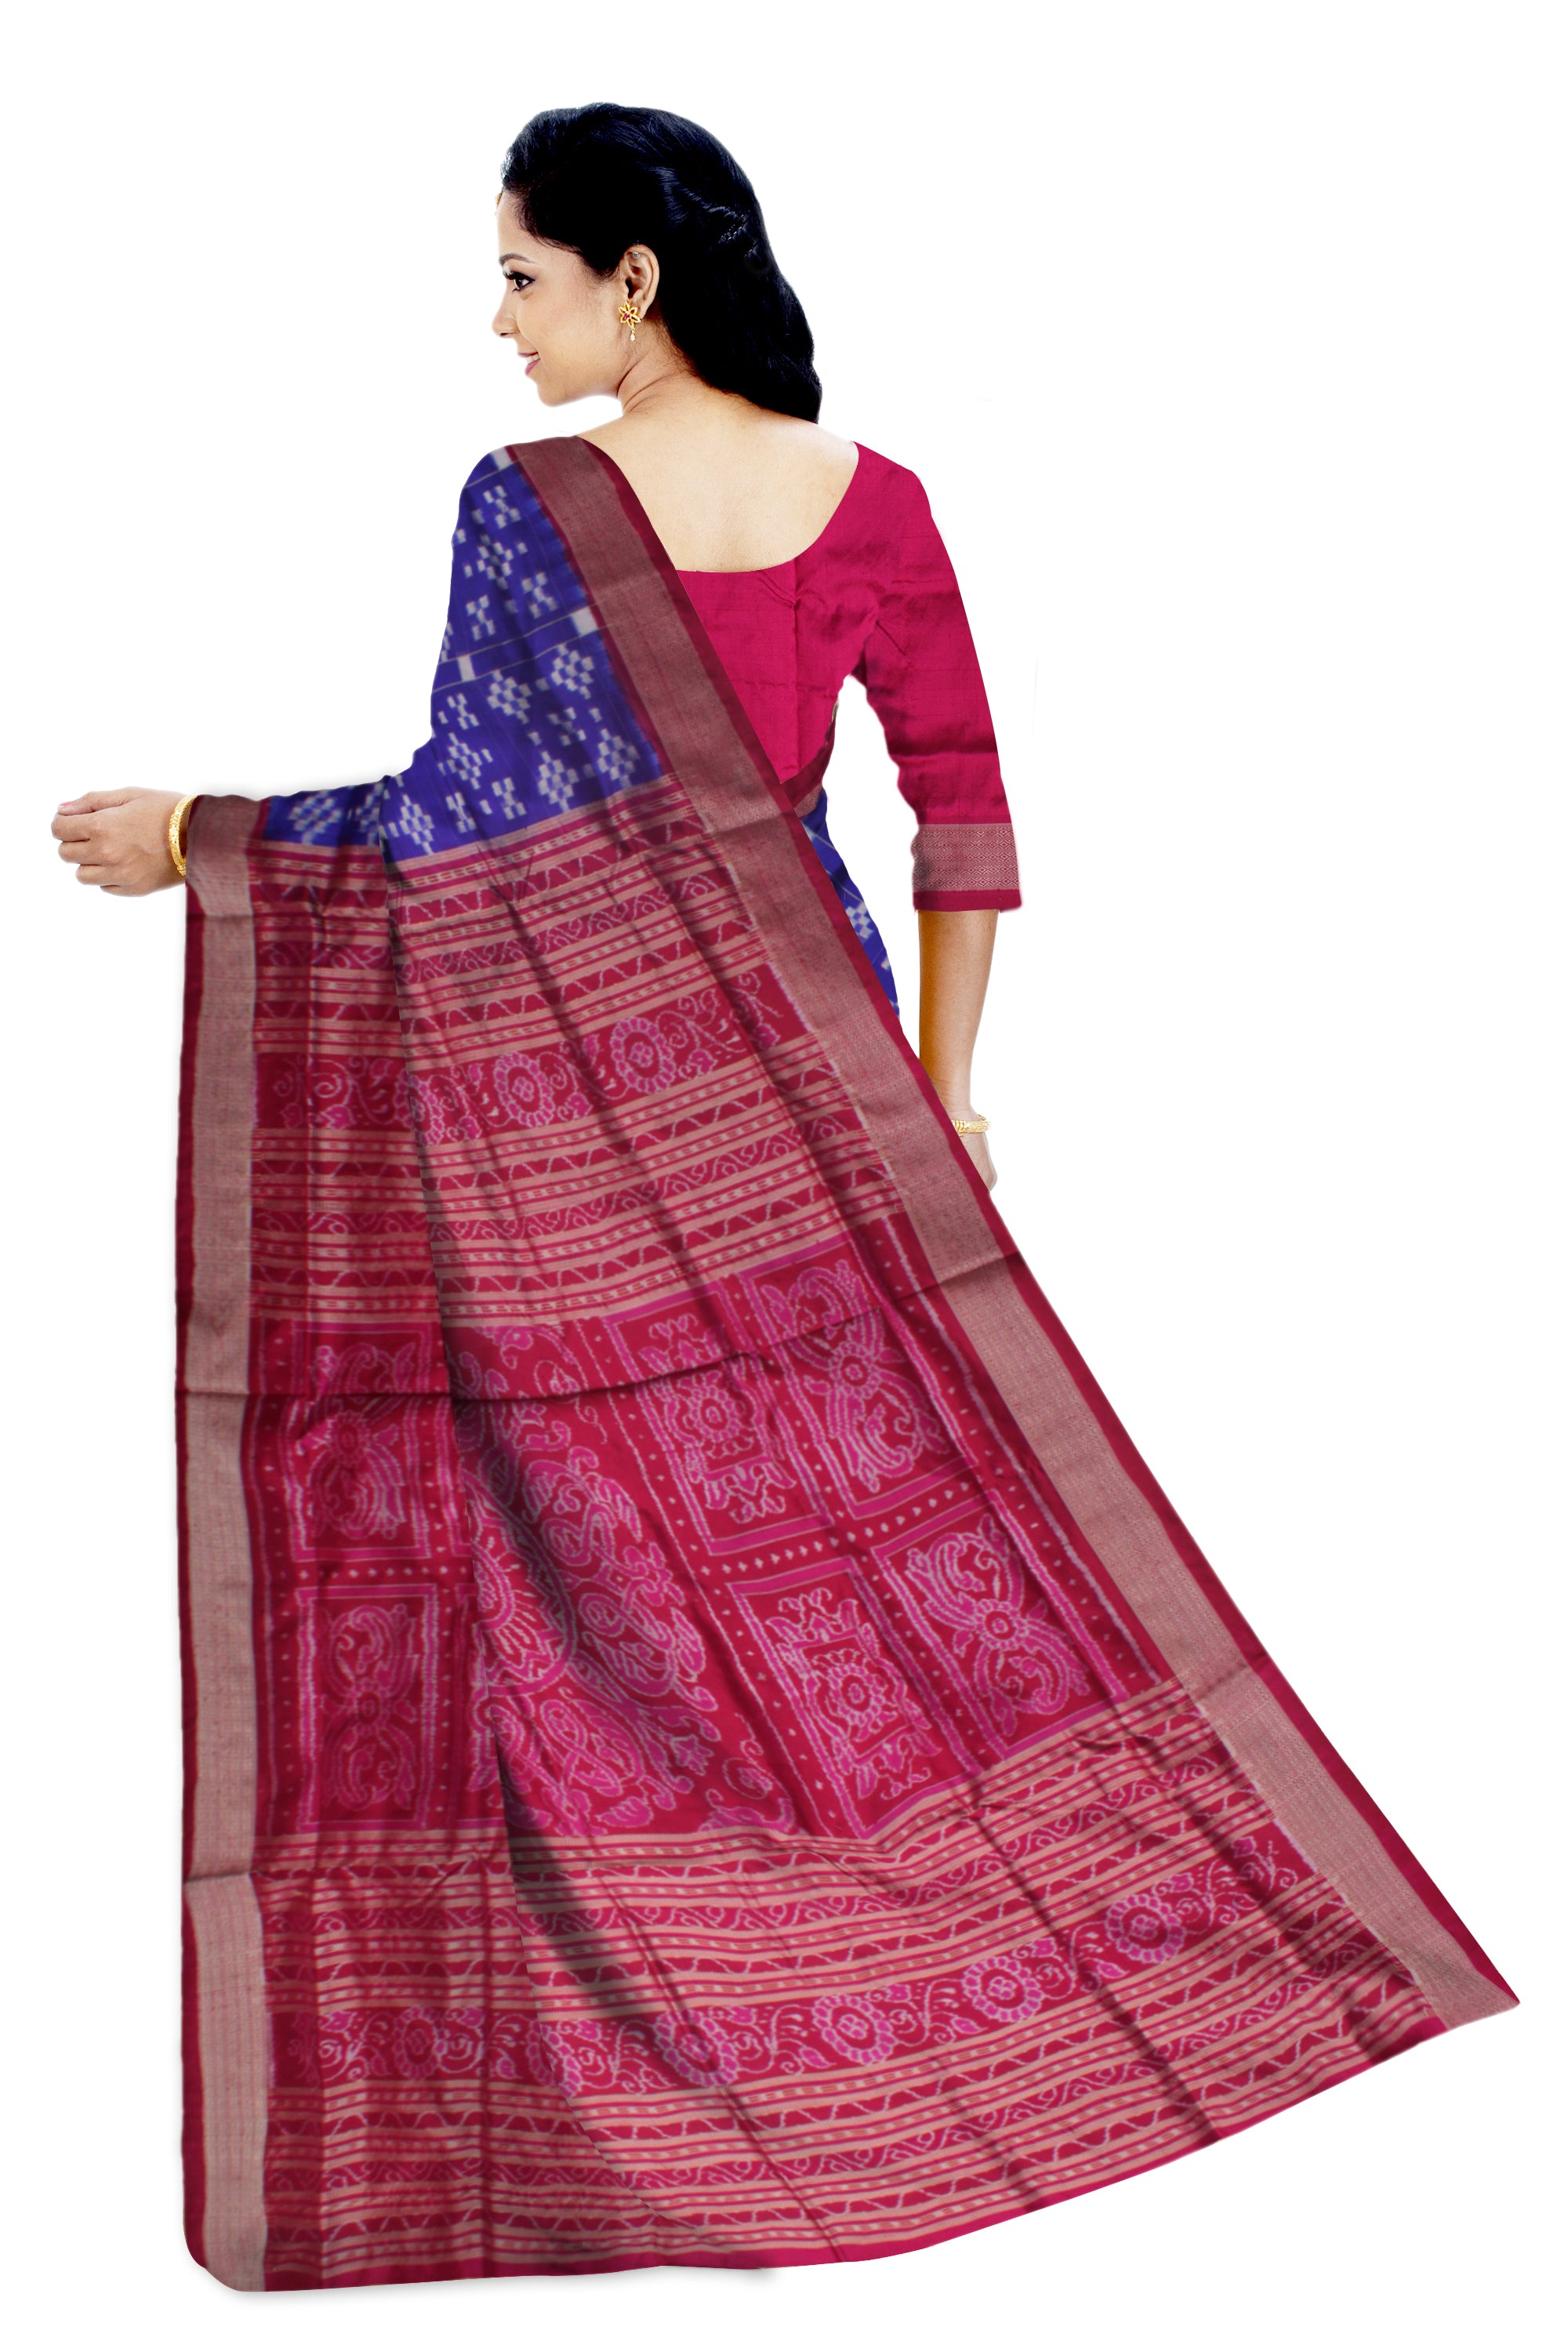 PASAPALI BOX PATTERN PURE SILK SAREE IS BLUE AND ROSY-PINK COLOR BASE,COMES WITH MATCHING BLOUSE PIECE. - Koshali Arts & Crafts Enterprise